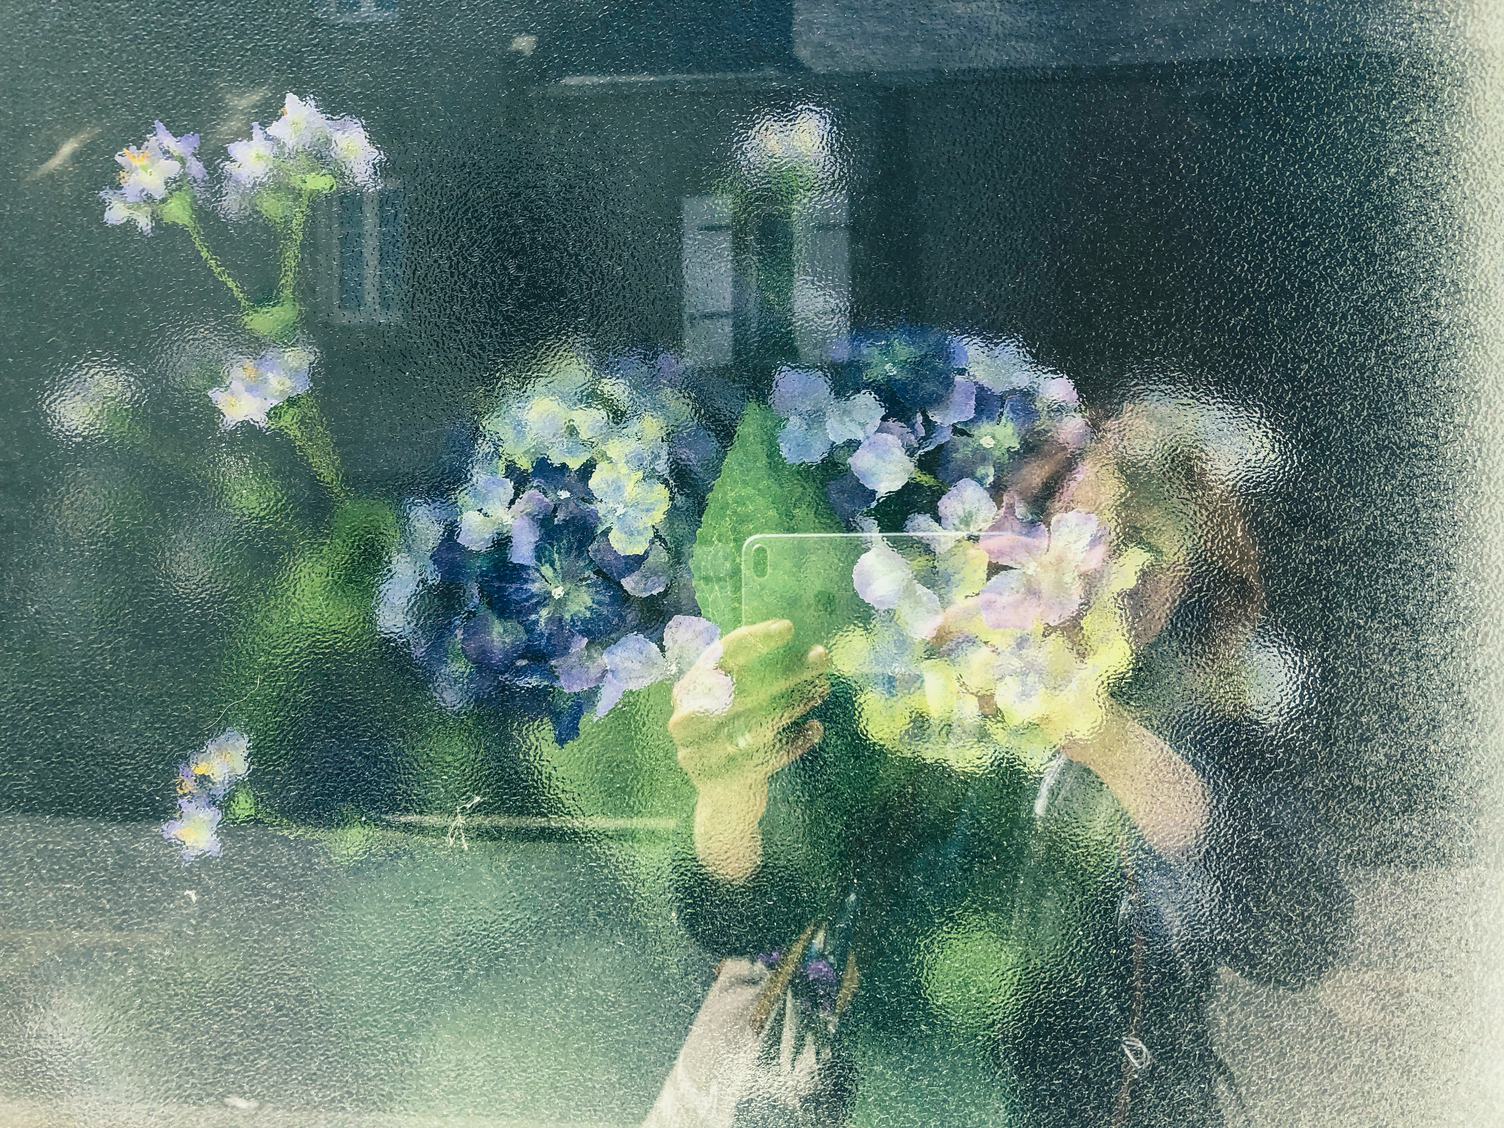 Forget Me Not Flower Glass Reflection Self-Portrait